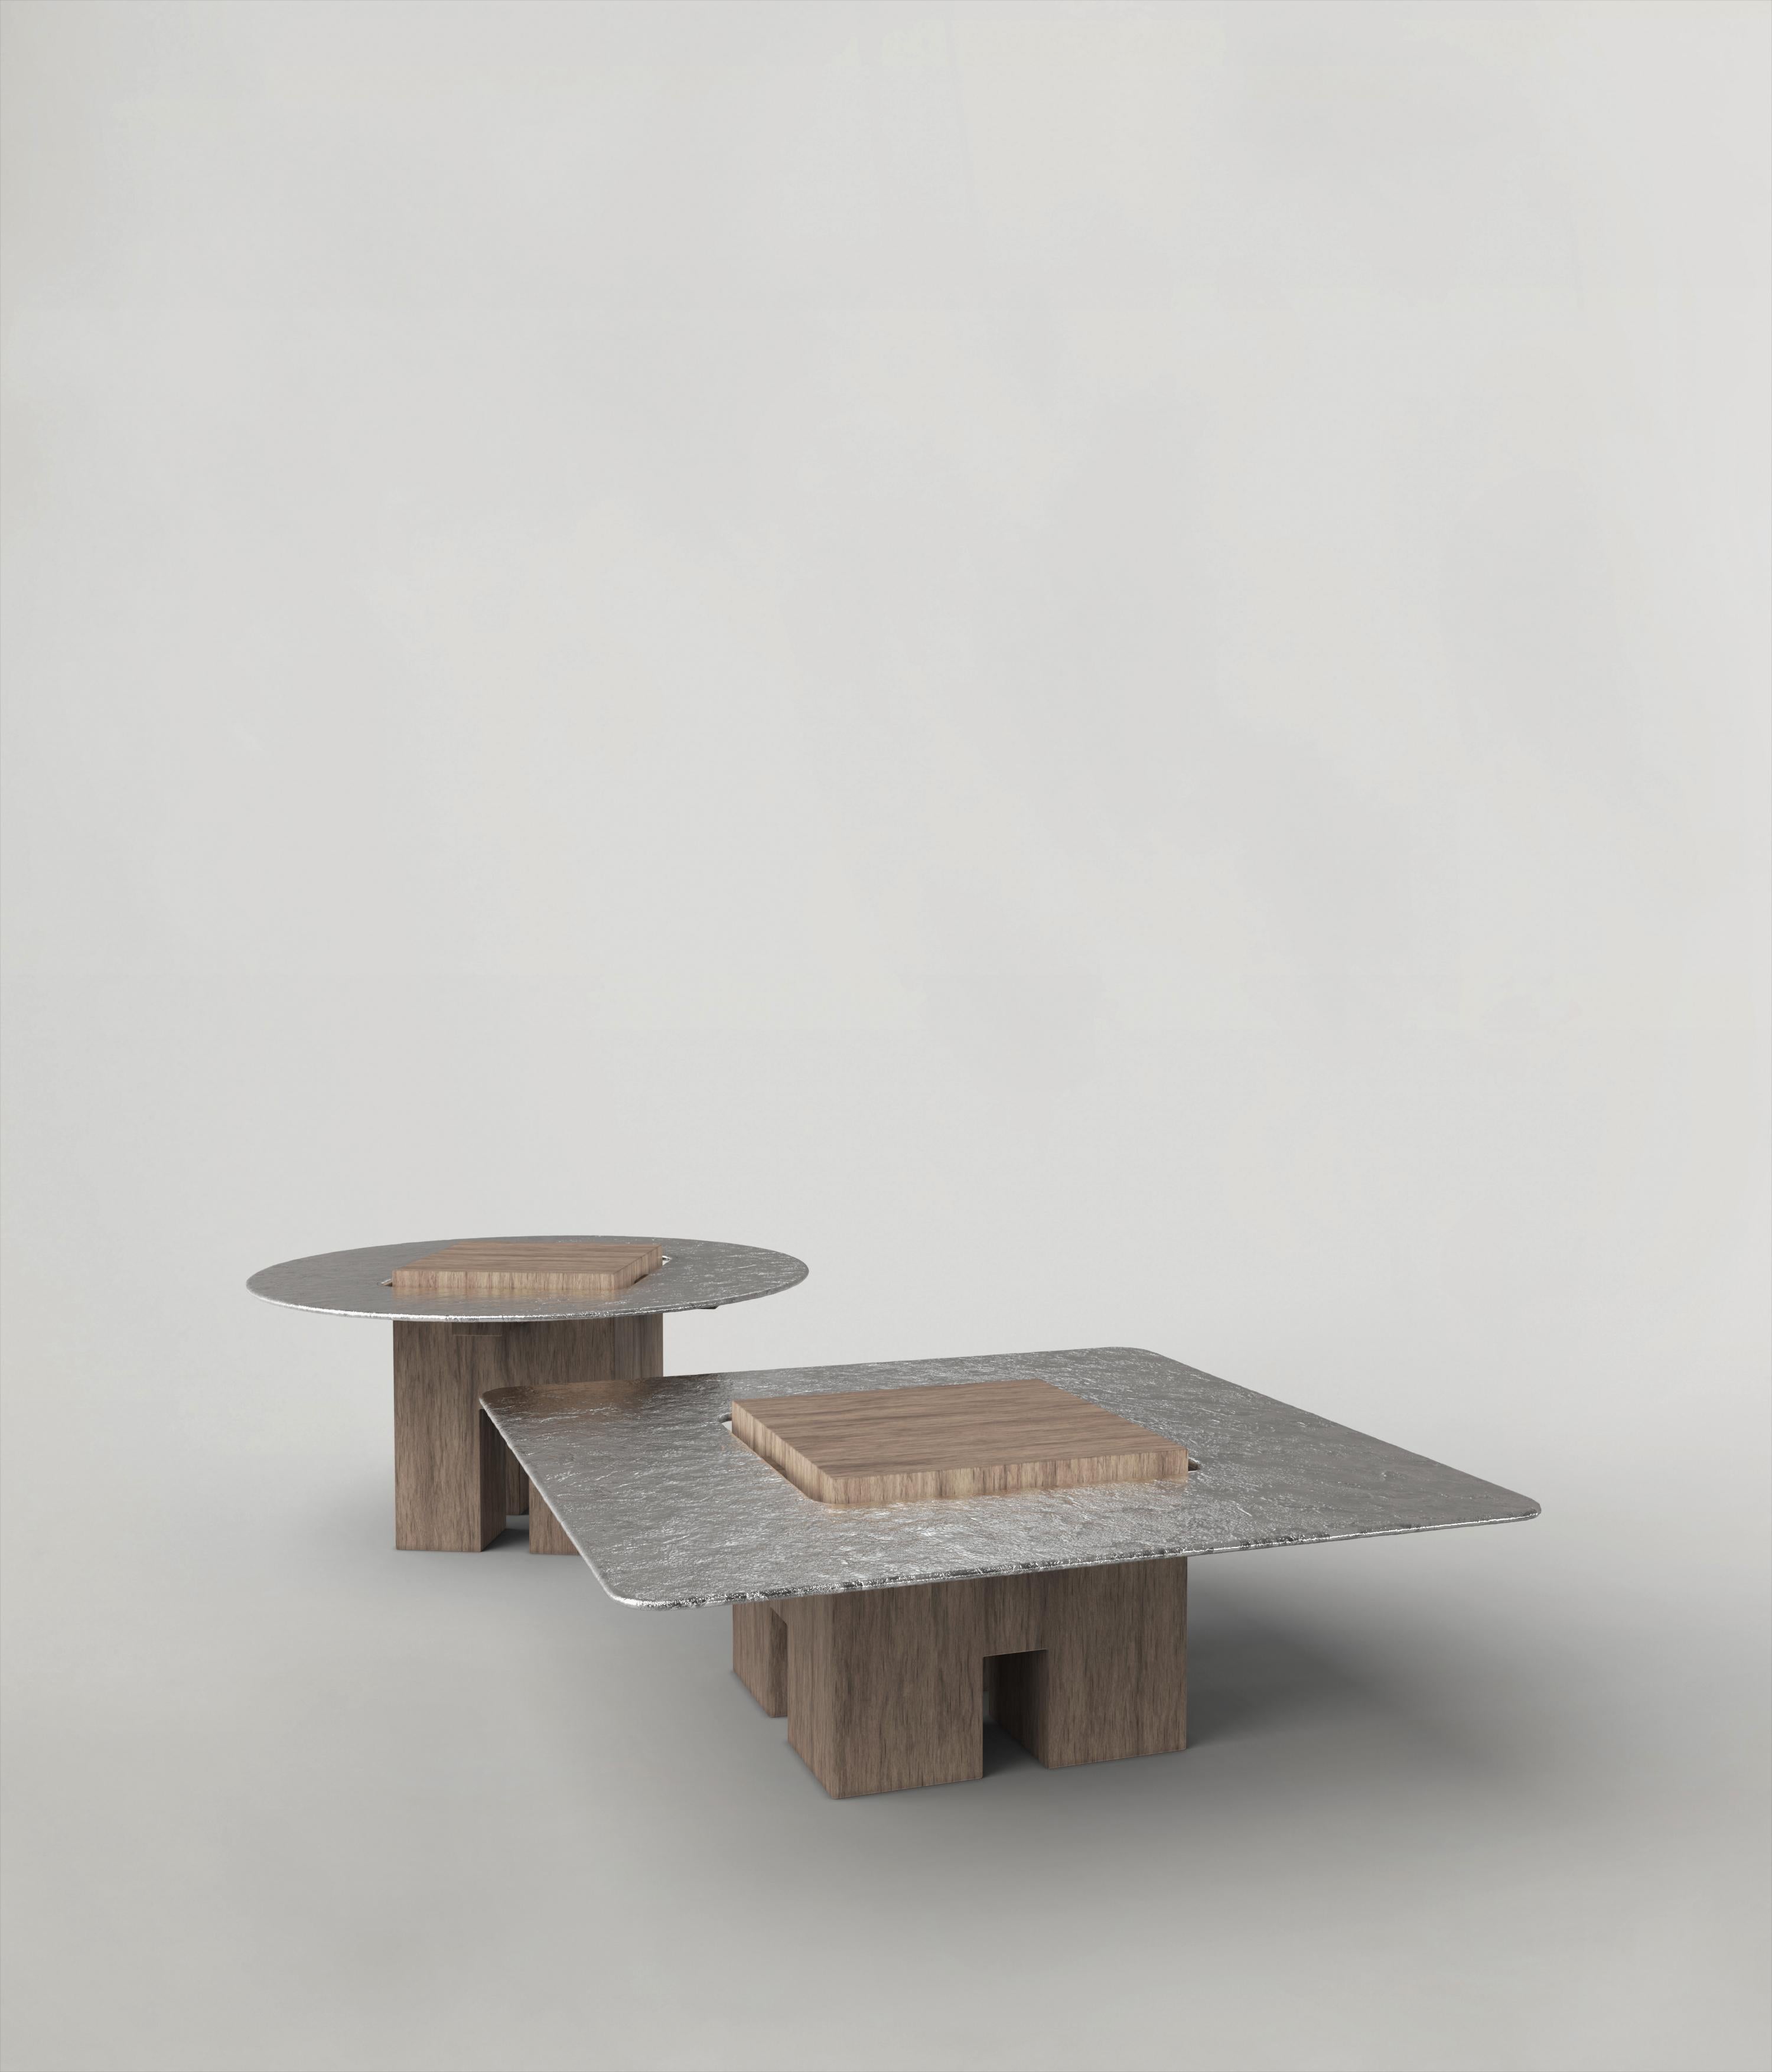 Set of 2 Tempio V1 and V2 low tables by Edizione Limitata
Limited Edition of 150 pieces. Signed and numbered.
Dimensions: D82 x W82 x H40 cm//D92 x W92 x H32 cm
Materials: Solid Ash Wood+Aluminum

Tempio is a collection of contemporary sculptural